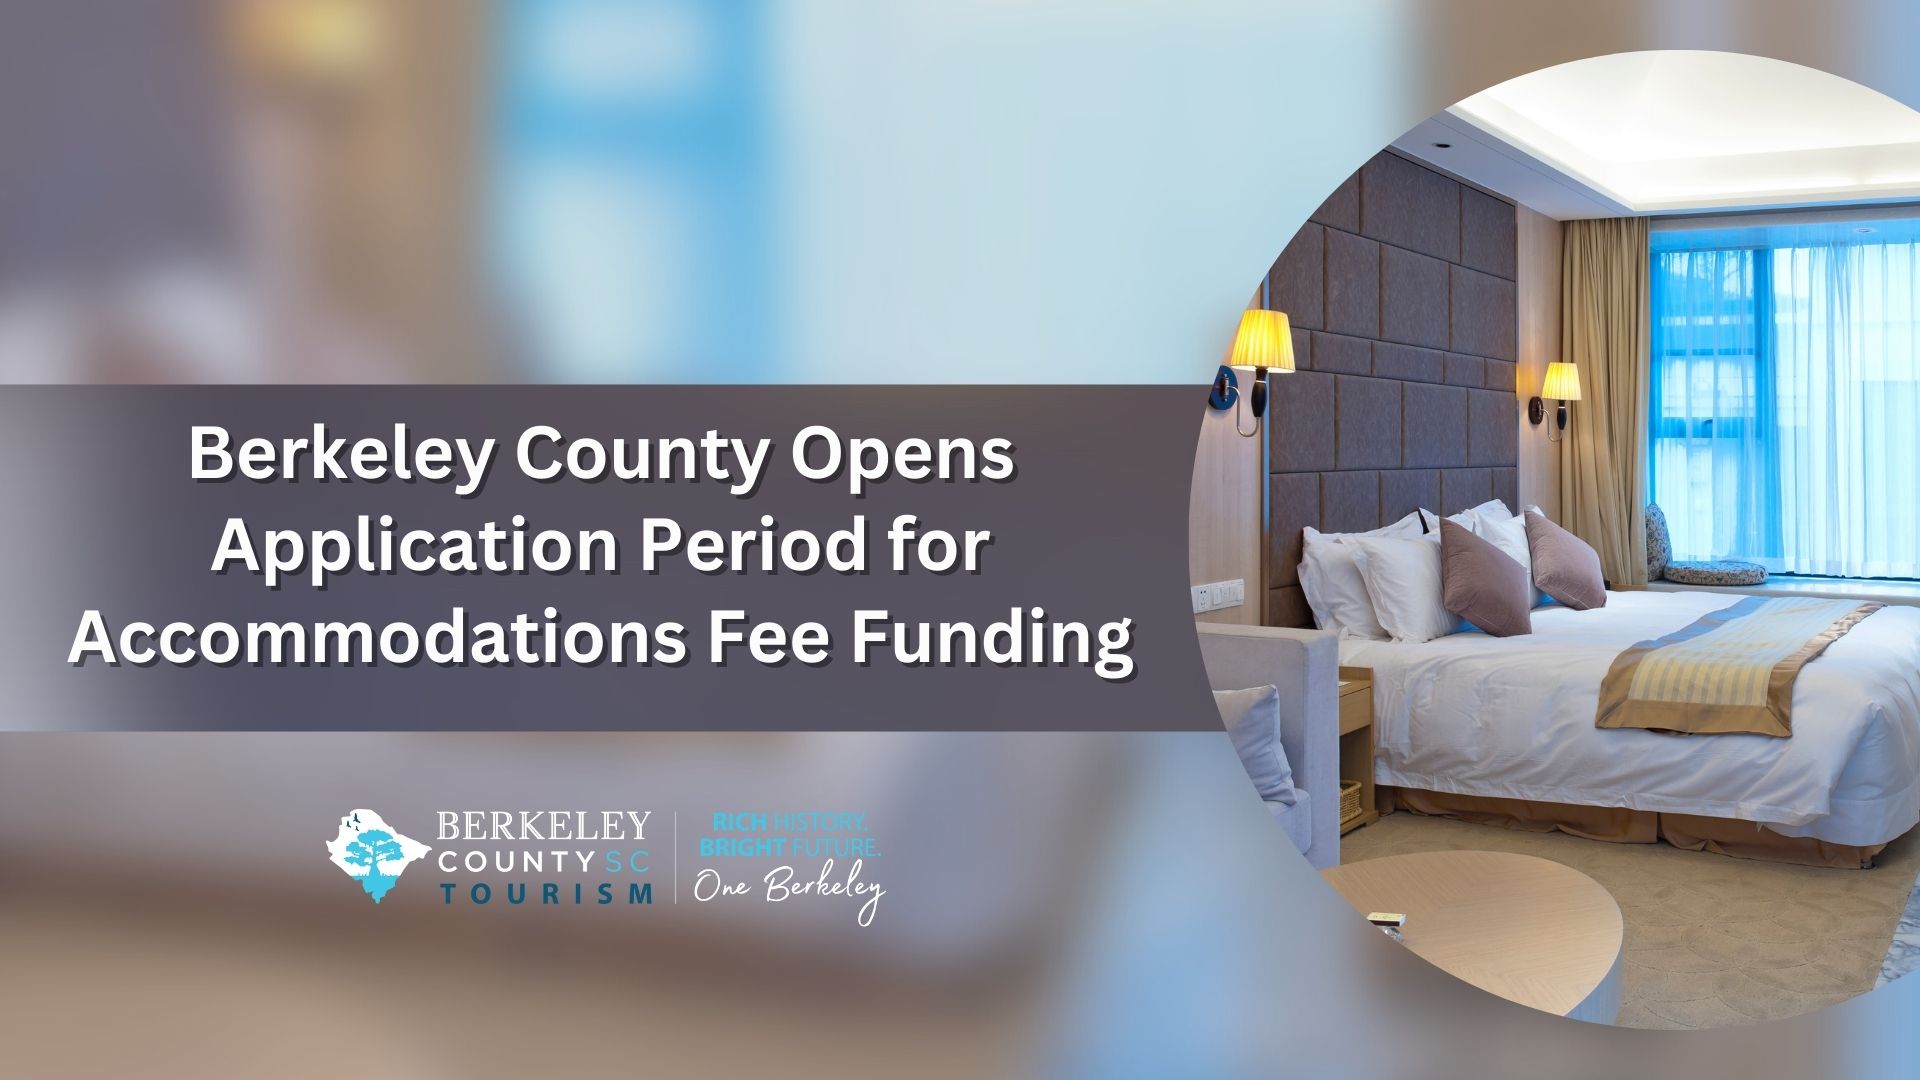 Berkeley County Opens Application Period for Accommodations Fee Funding